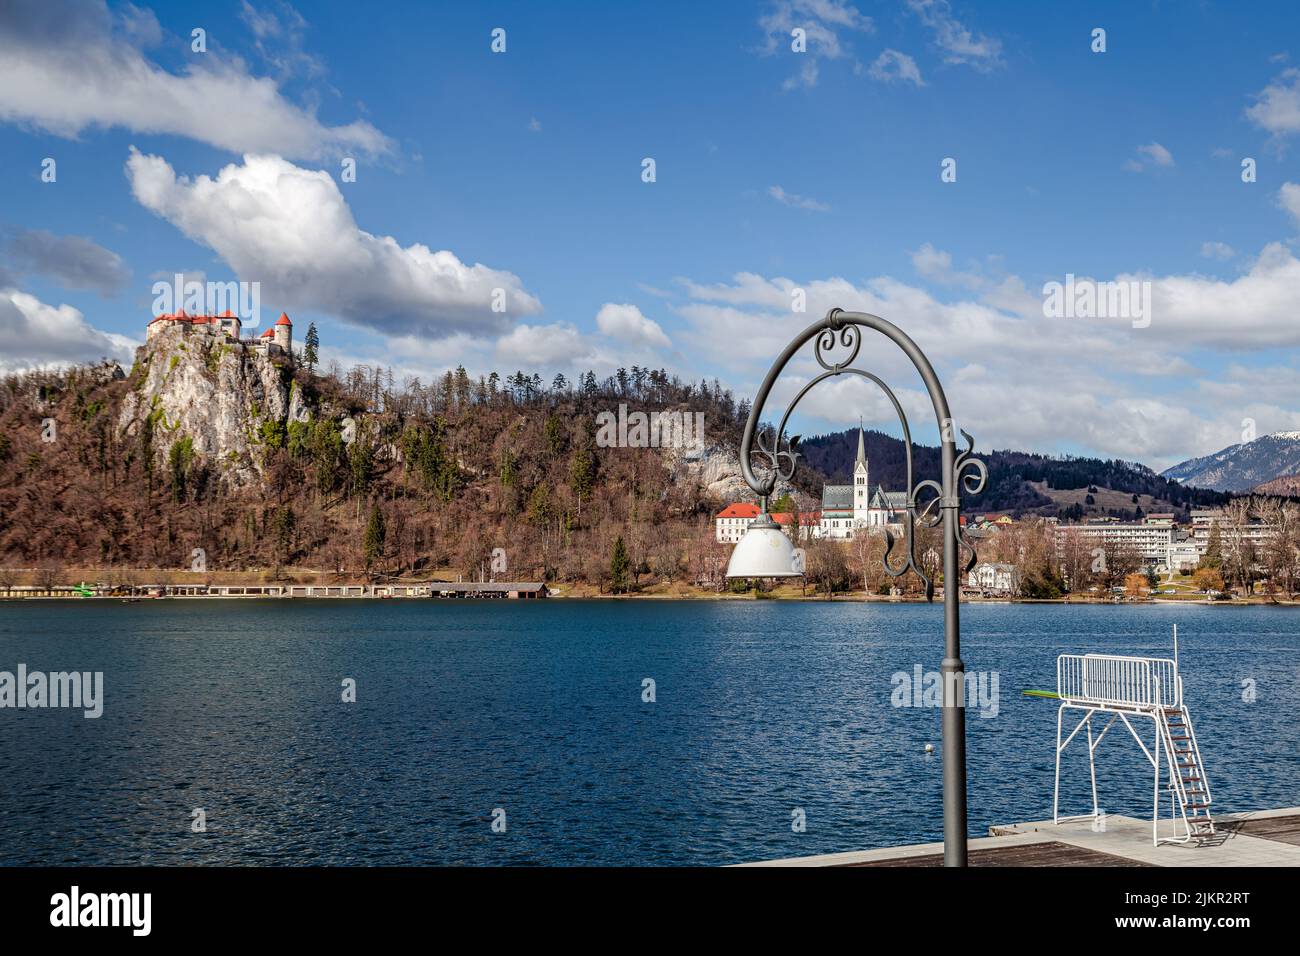 Bled, Slovenia - Lamp post and trampoline by Lake Bled with St. Martin's Parish Church, Bled Castle and blue sky and clouds at background on a sunny w Stock Photo